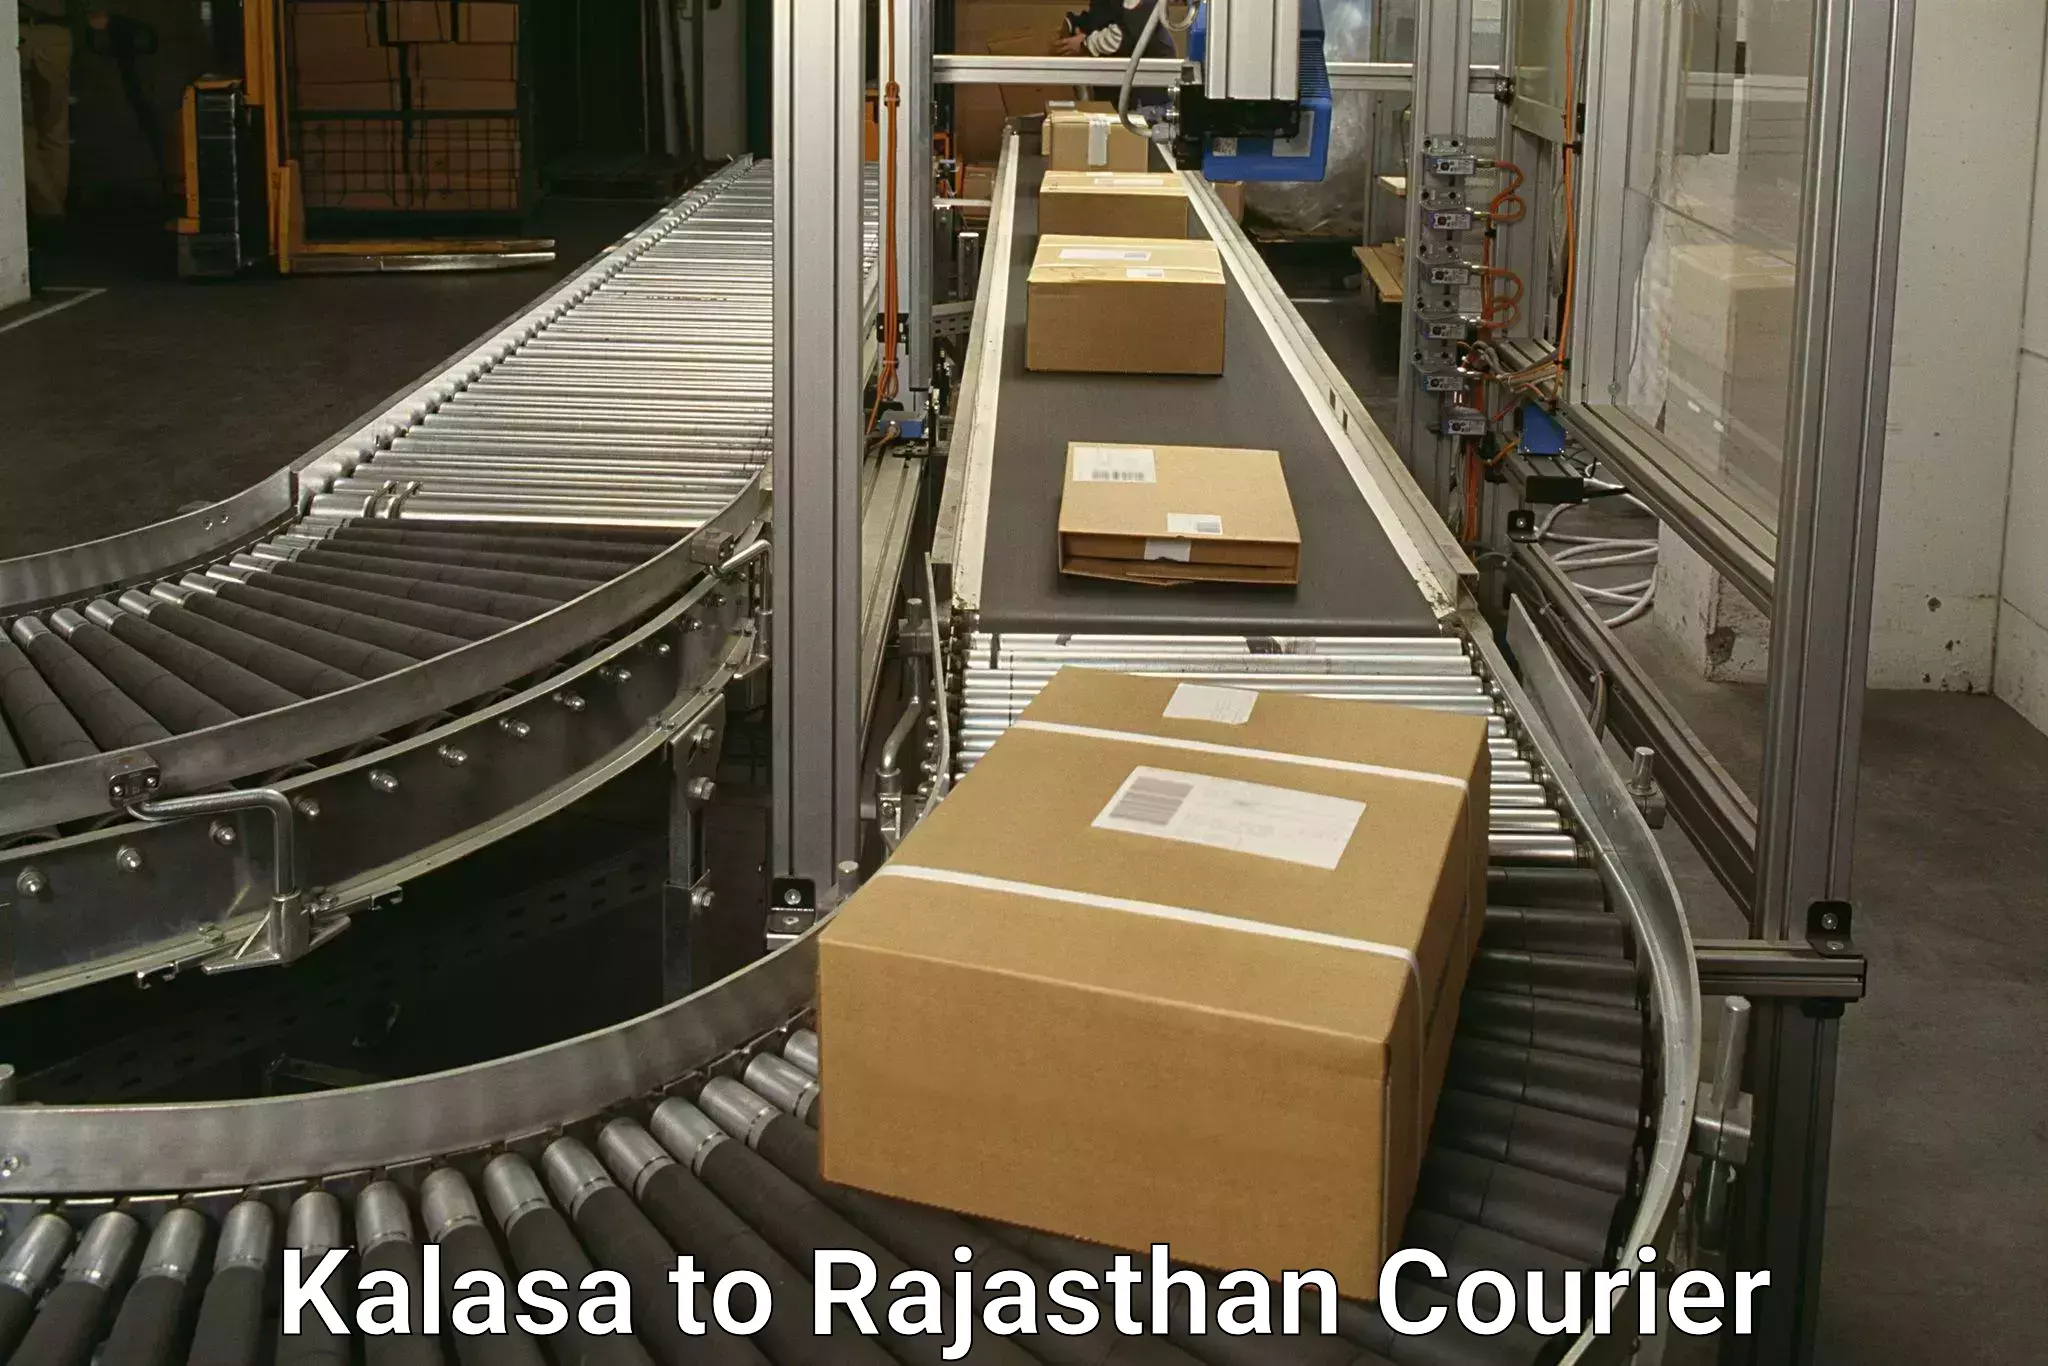 Courier service efficiency in Kalasa to Rajasthan